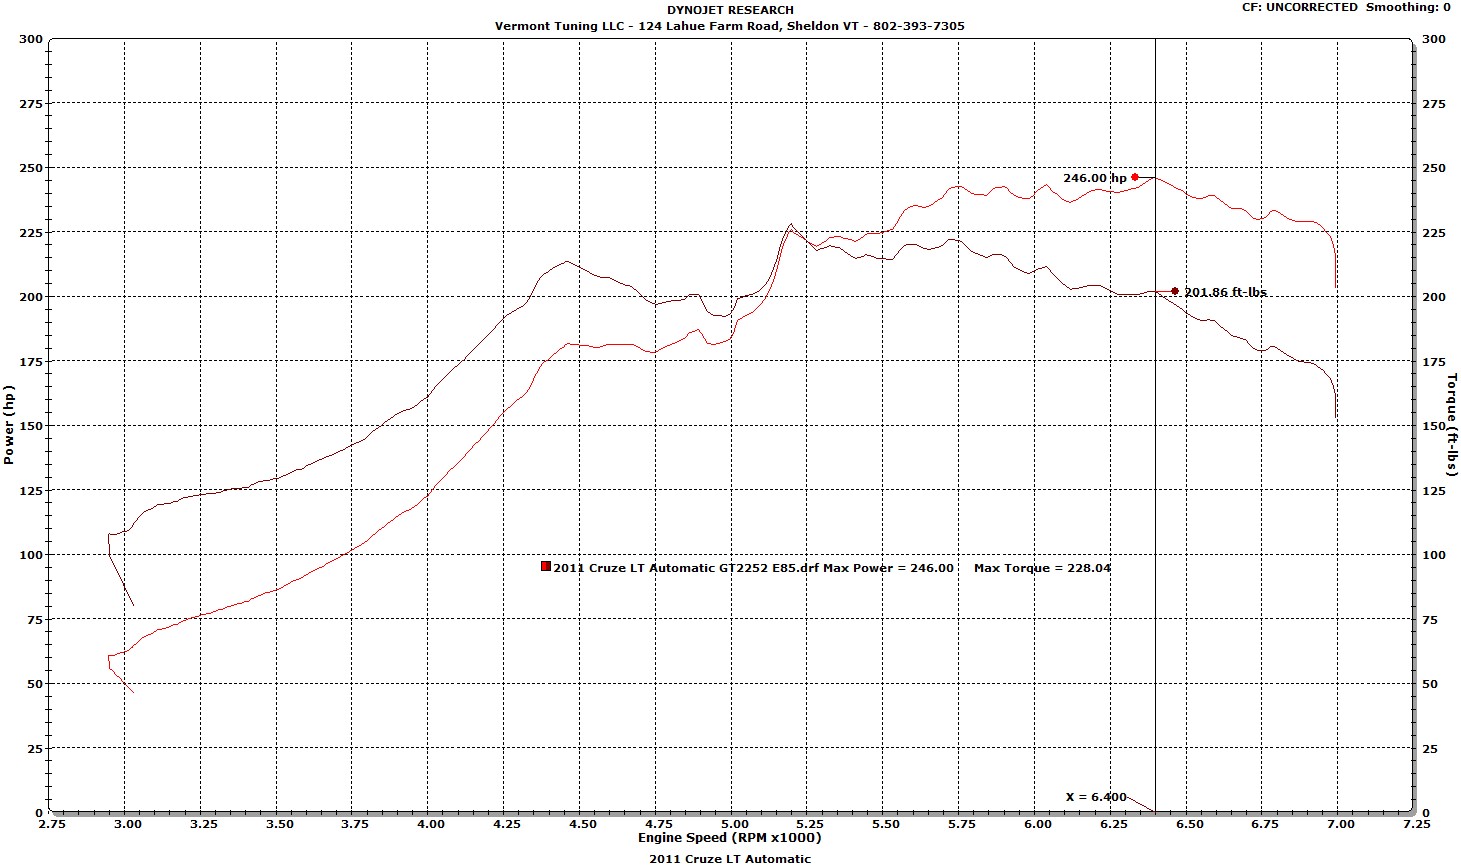 Cruze GT2252 Dyno Results 248hp at the wheels!